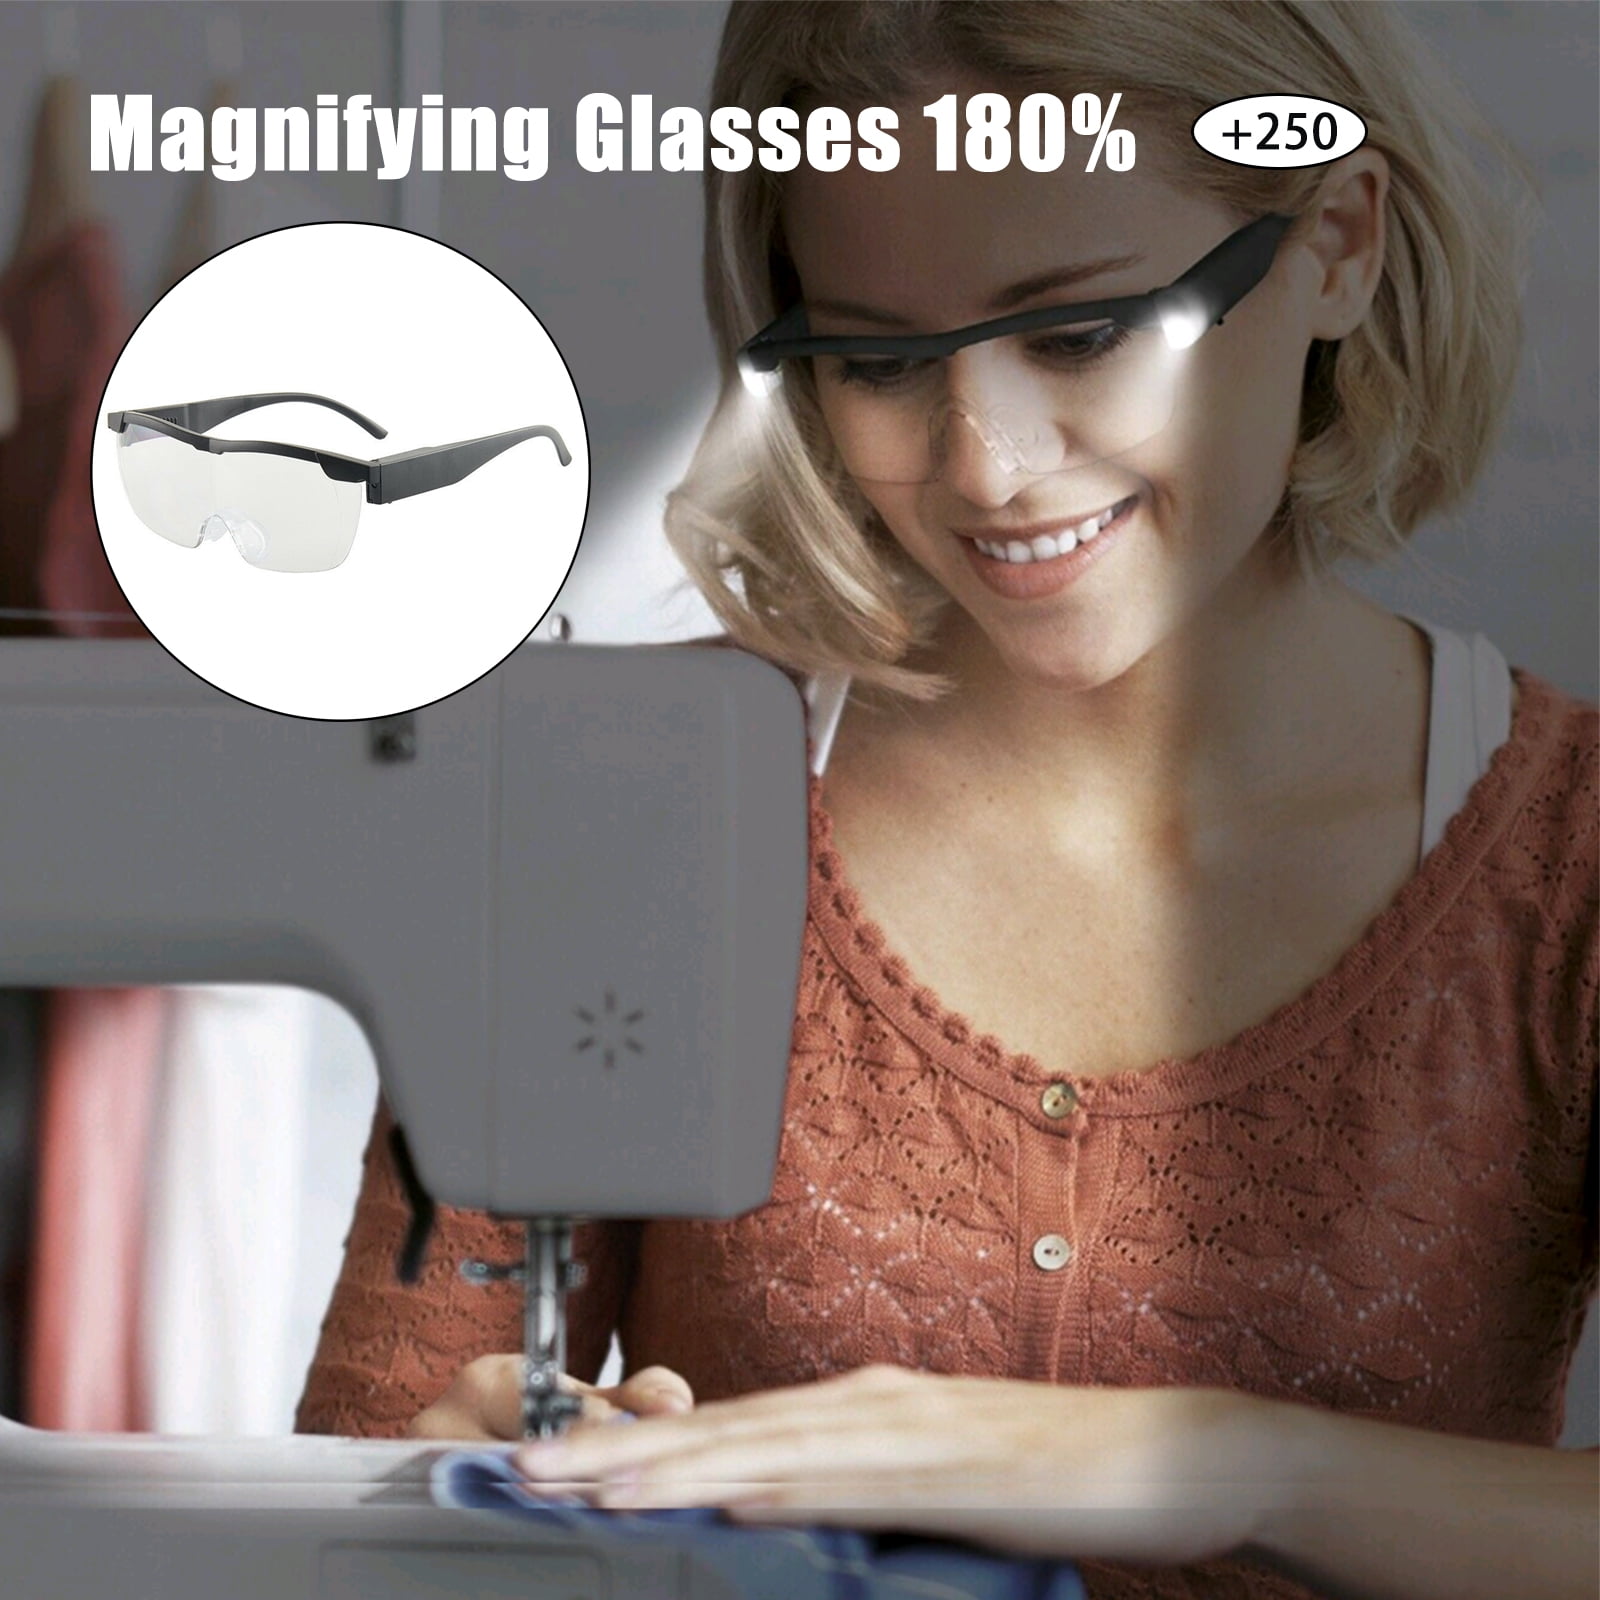 180% Magnifying Glasses With Rechargeable Led Light - Powerful Magnifying  Glasses - Hands Free Glasses For Close Work, Crafts, Jewelers, Reading,  Hobb